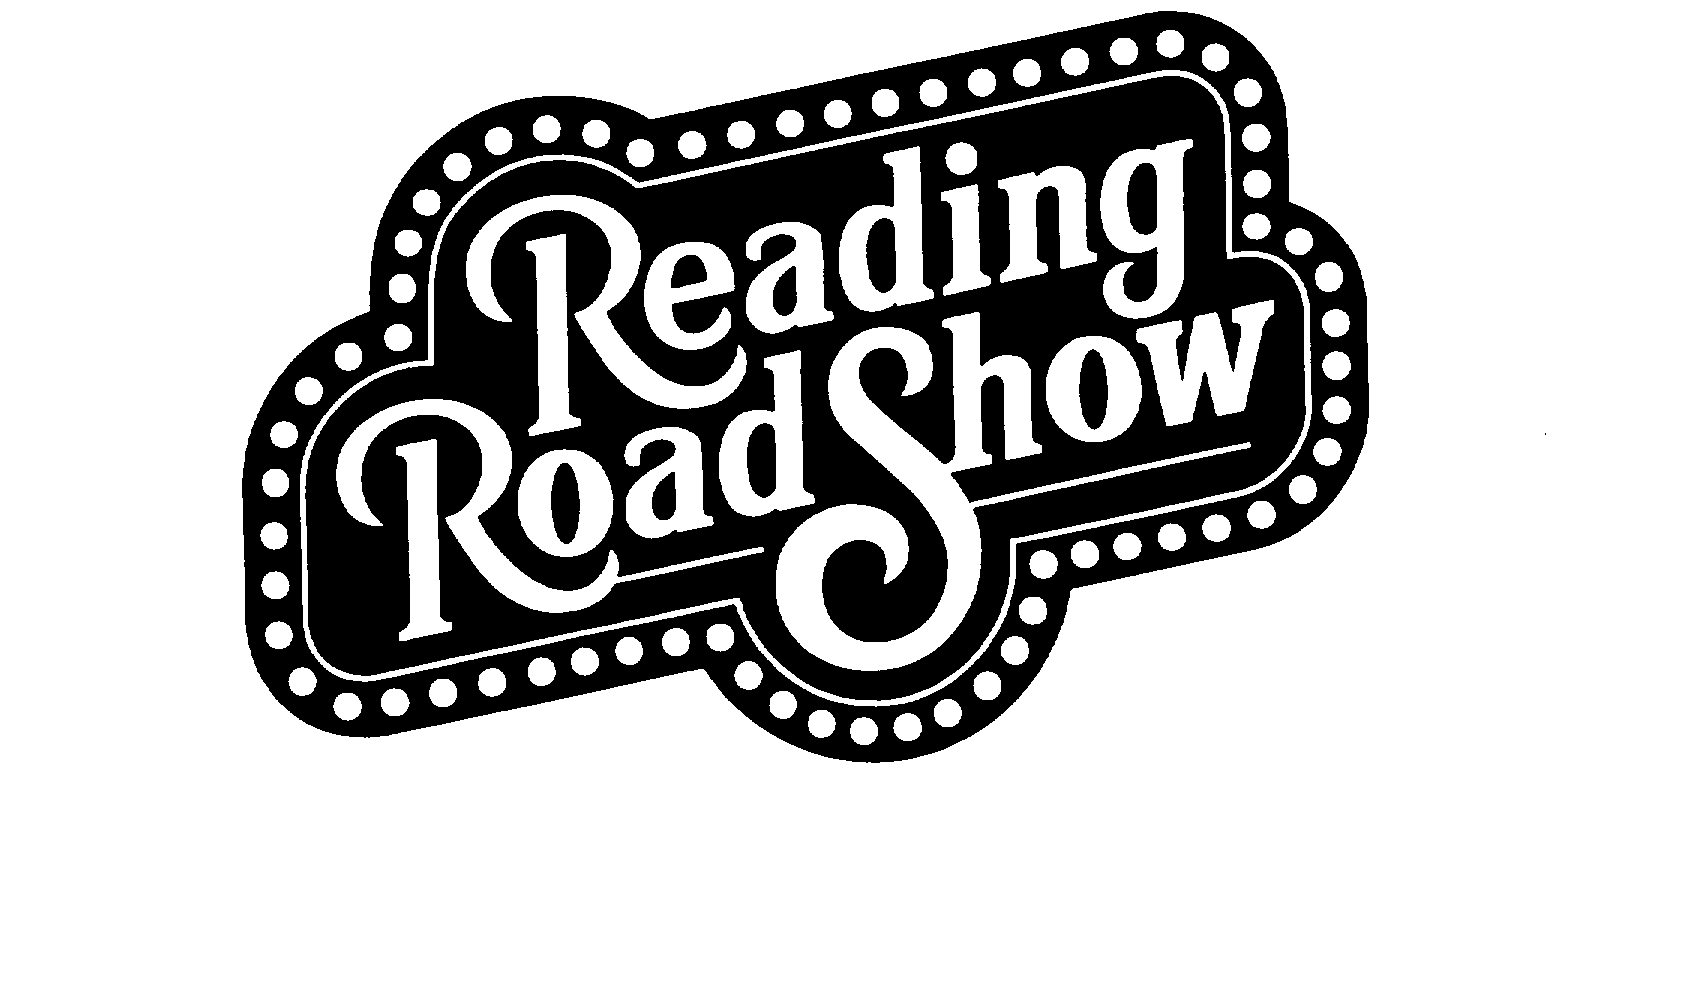  READING ROAD SHOW